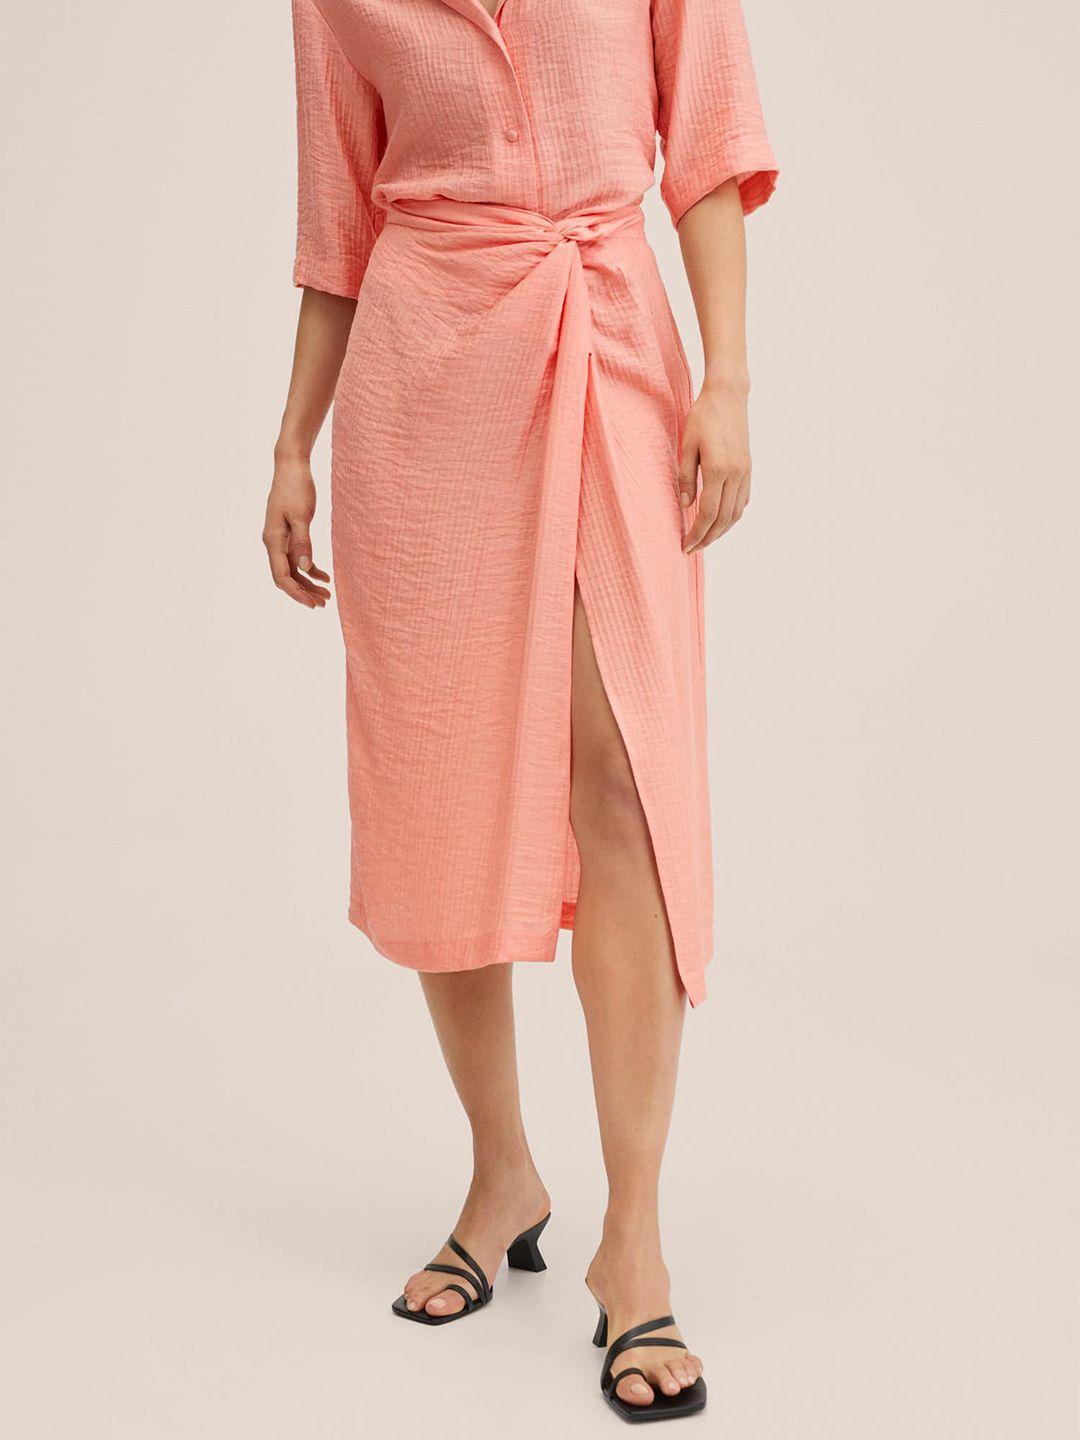 mango coral pink solid a-line midi skirt